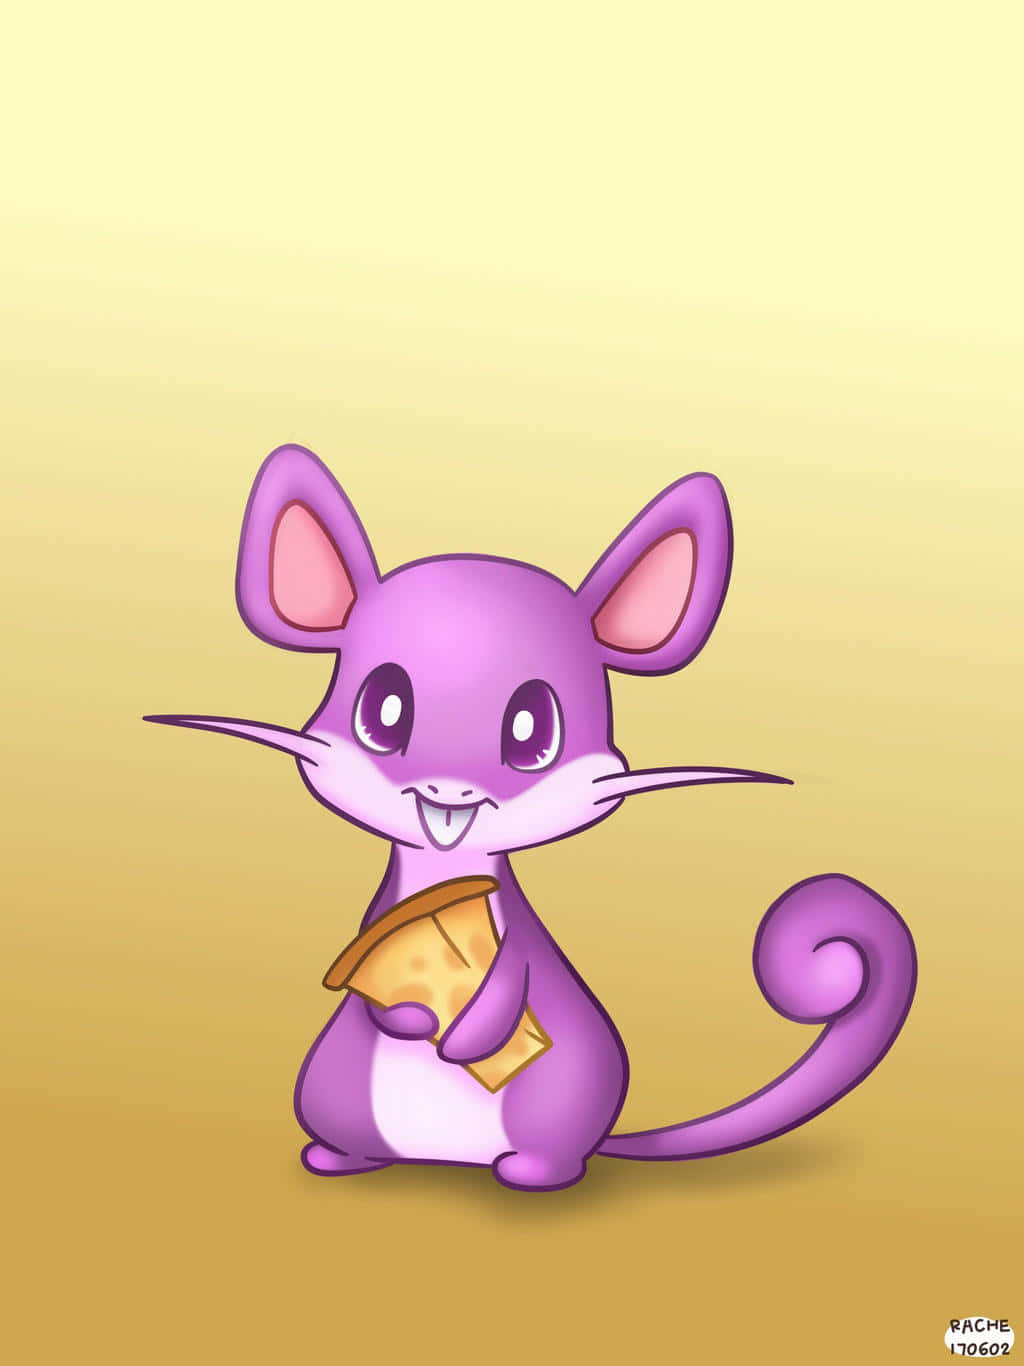 Pokémon Rattata Holding A Cheese In Yellow Background Wallpaper